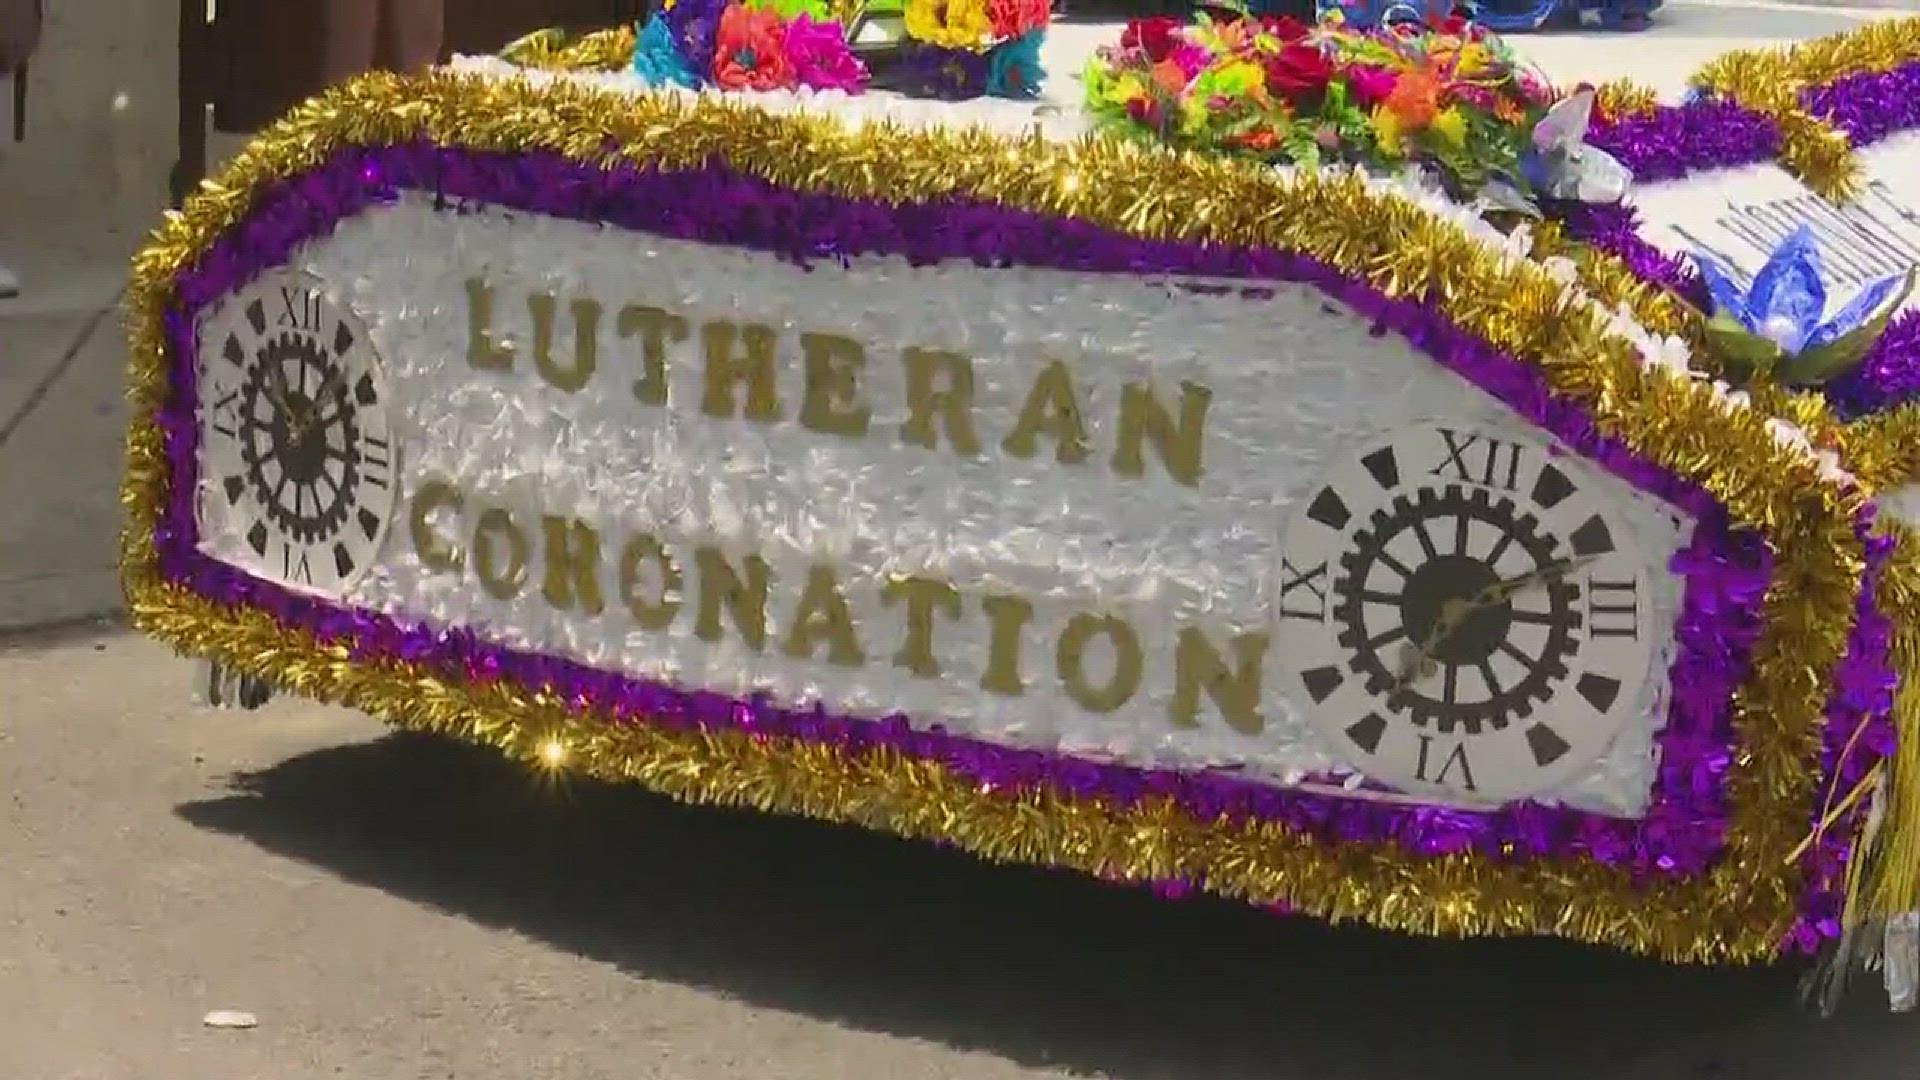 When members of the Royal Court of the 20th Century showed up to claim their float before Friday's Battle of Flowers parade, the royalty found they were the victims of theft.